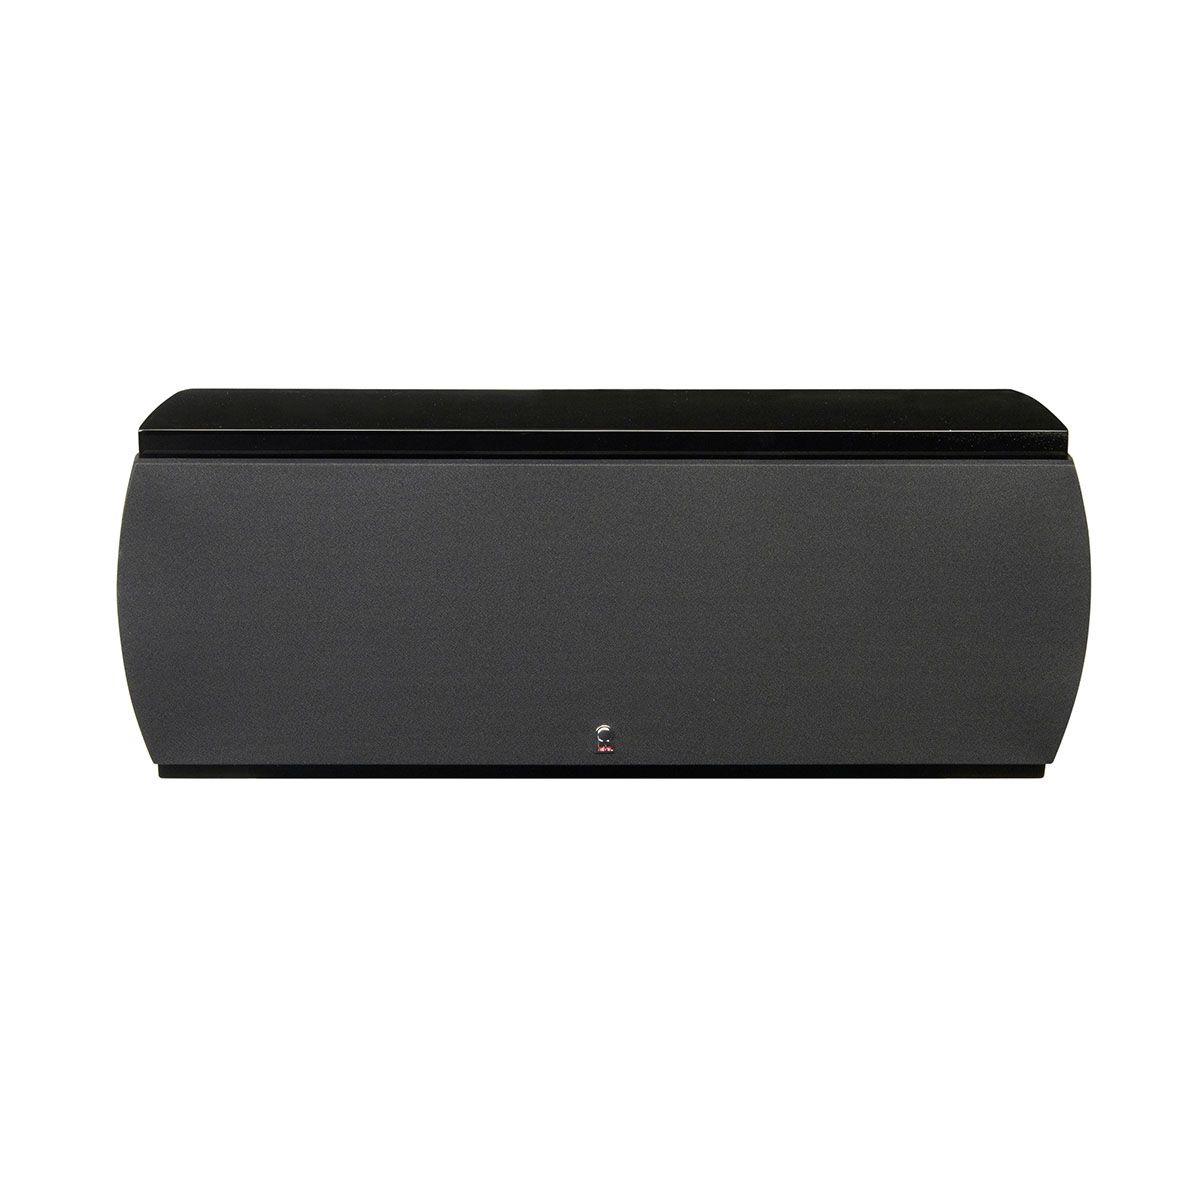 Revel C205 2-way Center Channel Loudspeaker - Gloss Black, with grille - front view